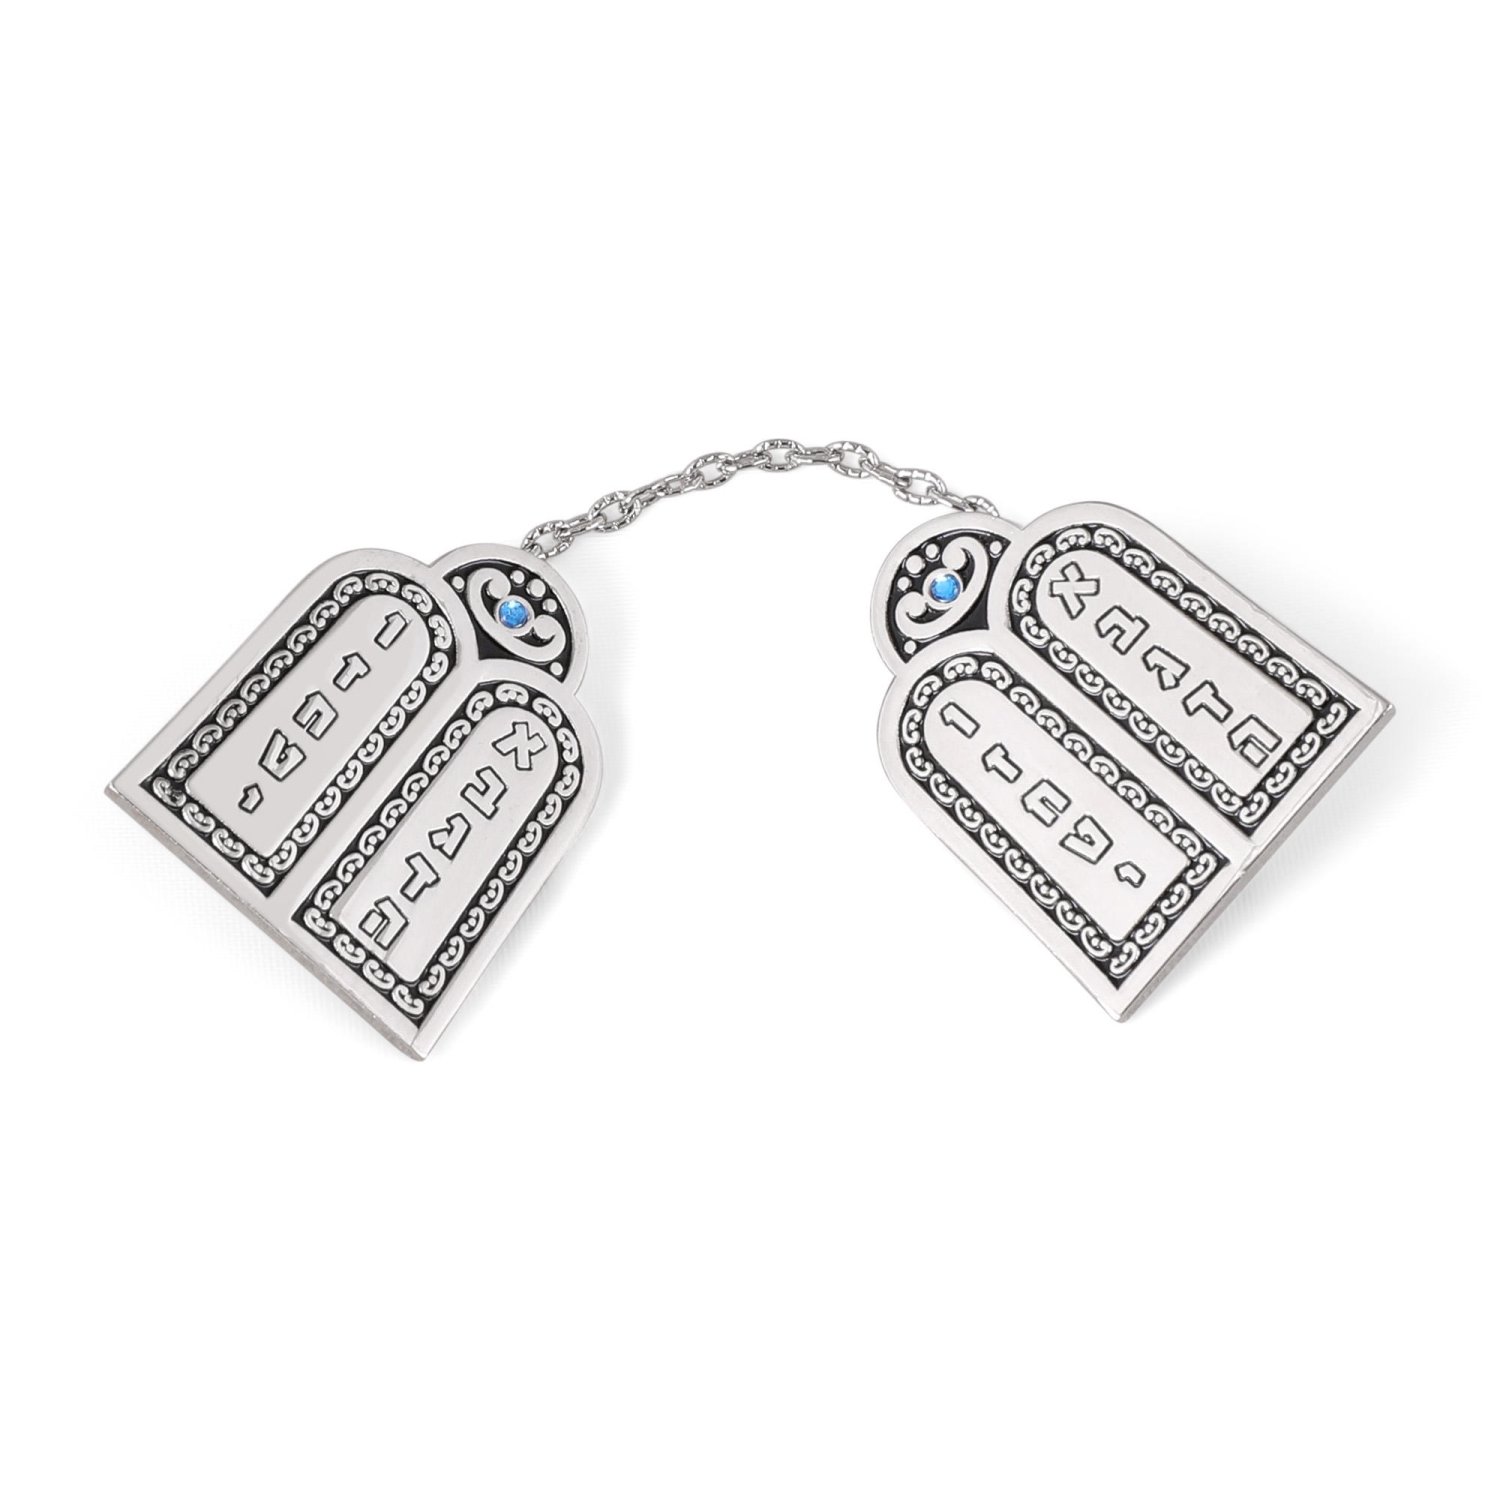 Nickel Ten Commandments Tallit Clips with Blue Crystals - 1